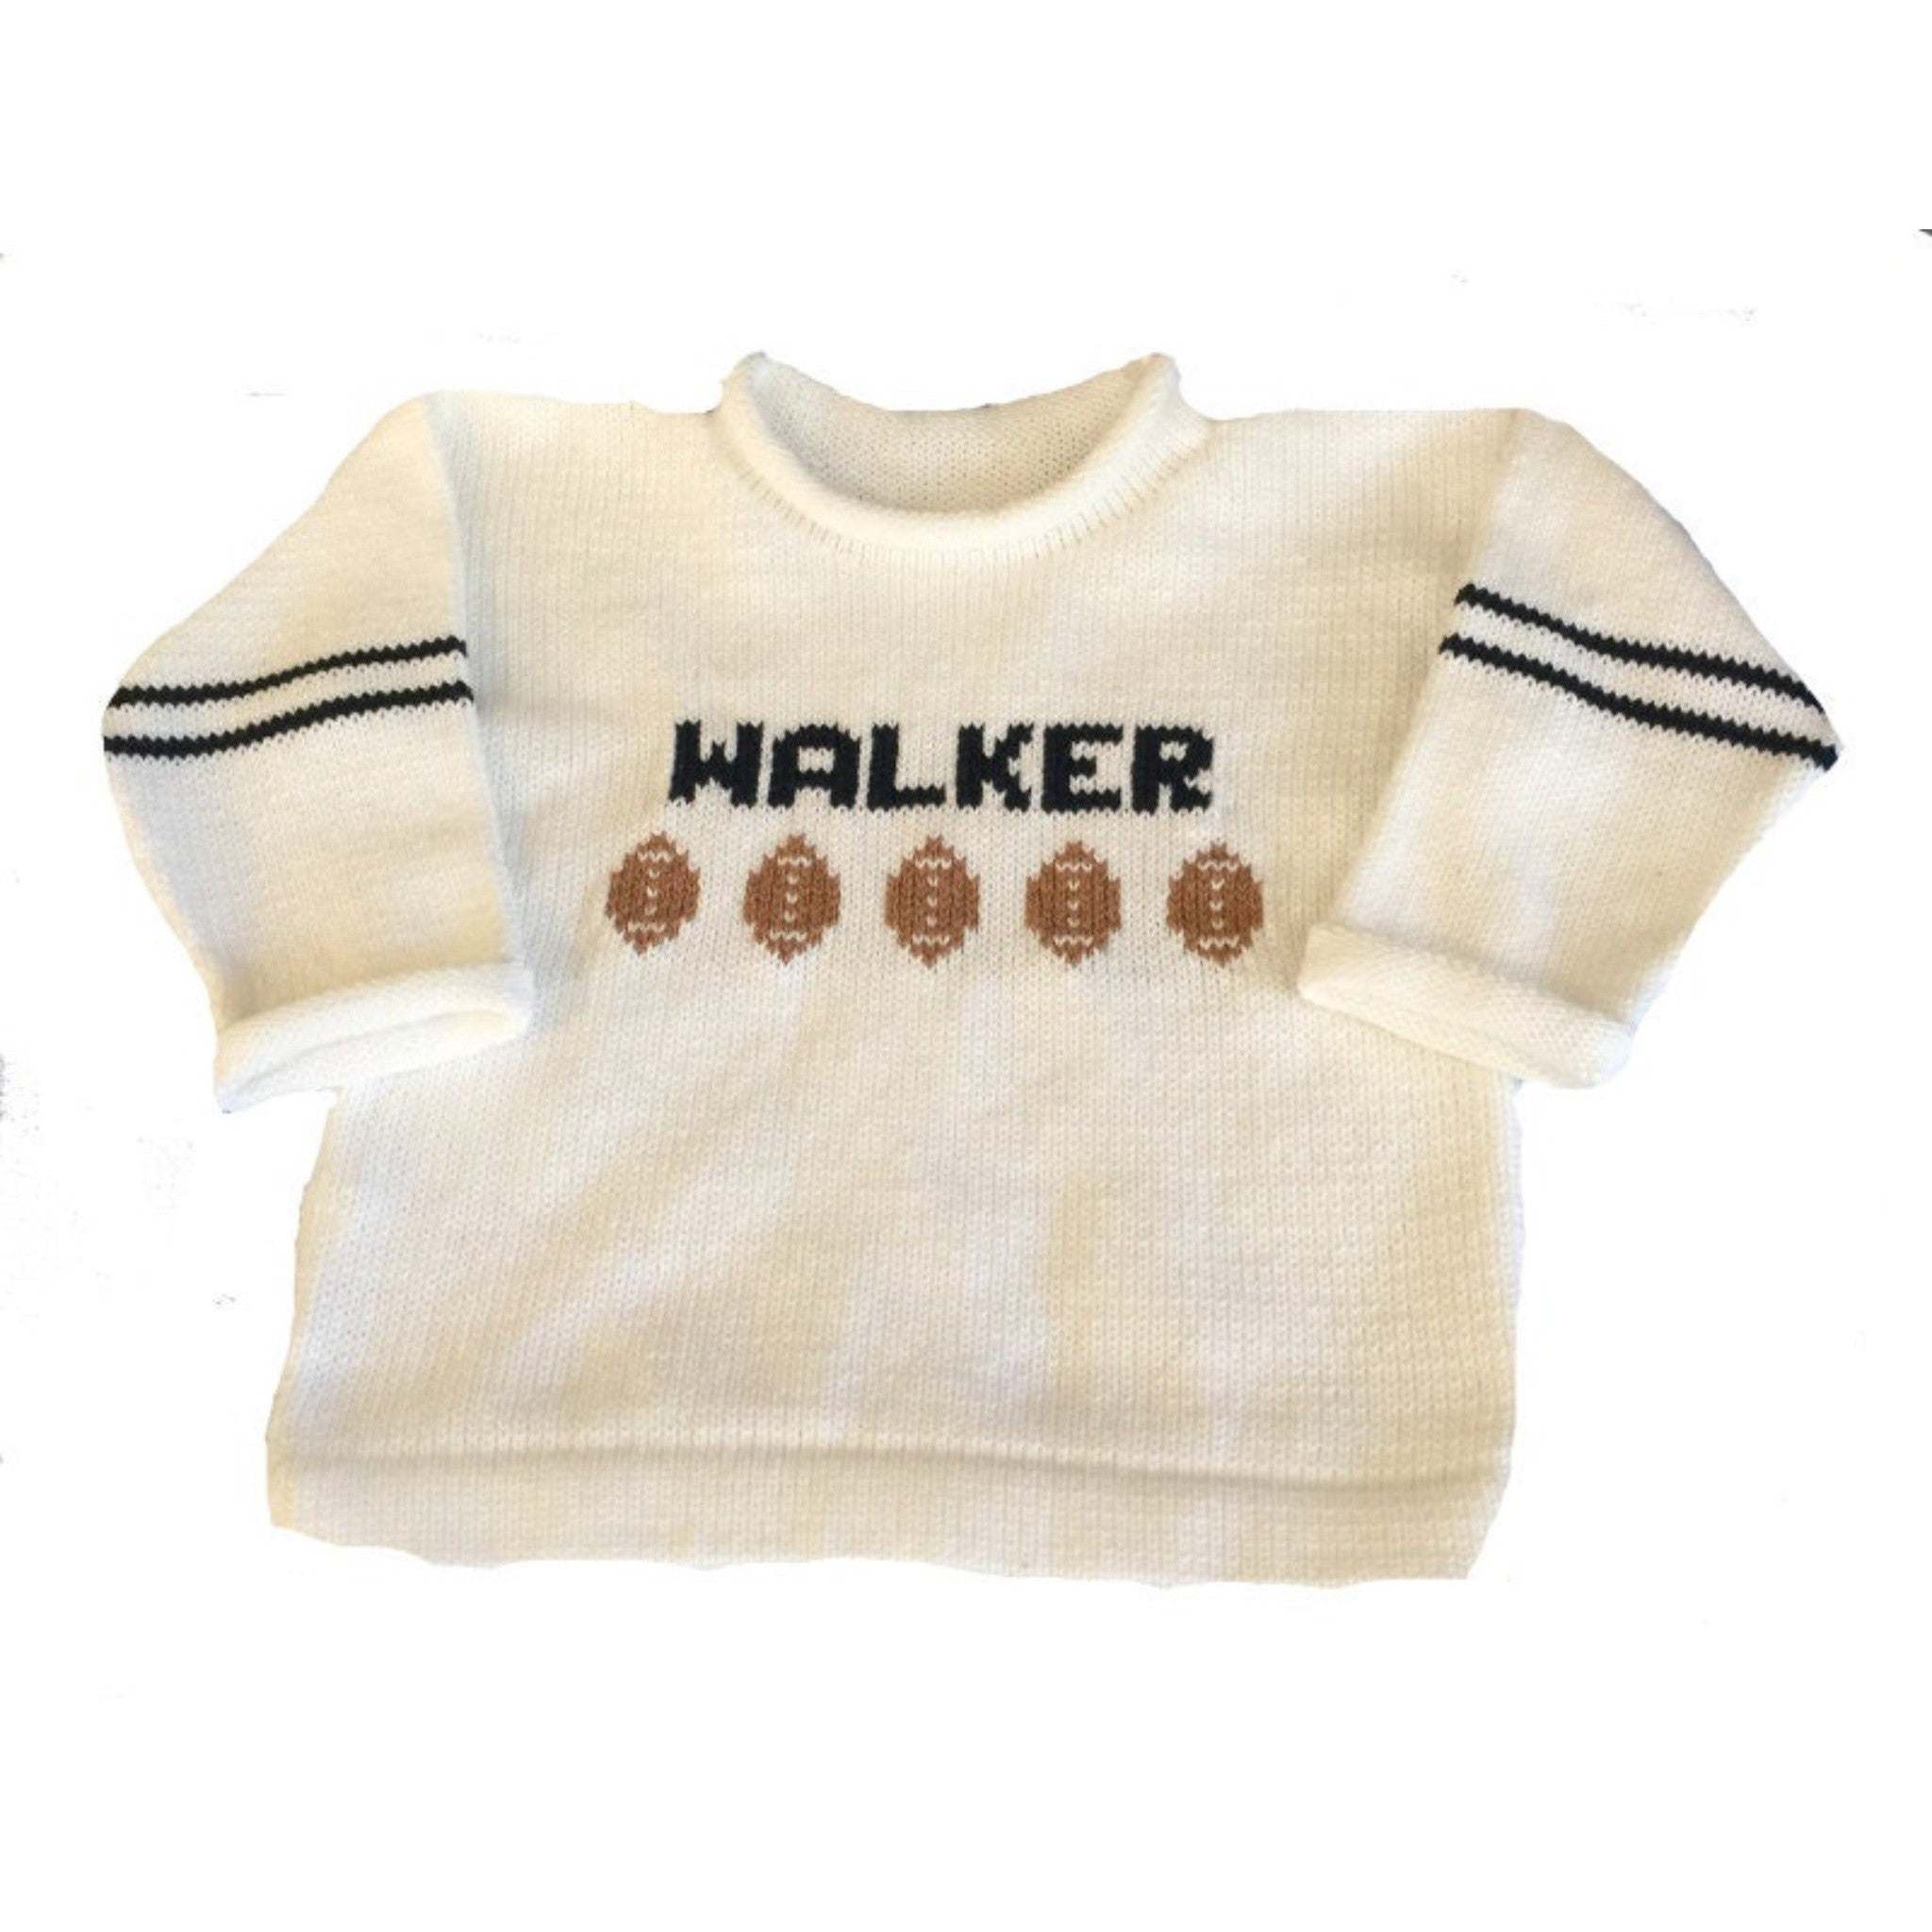 name sweater with footballs